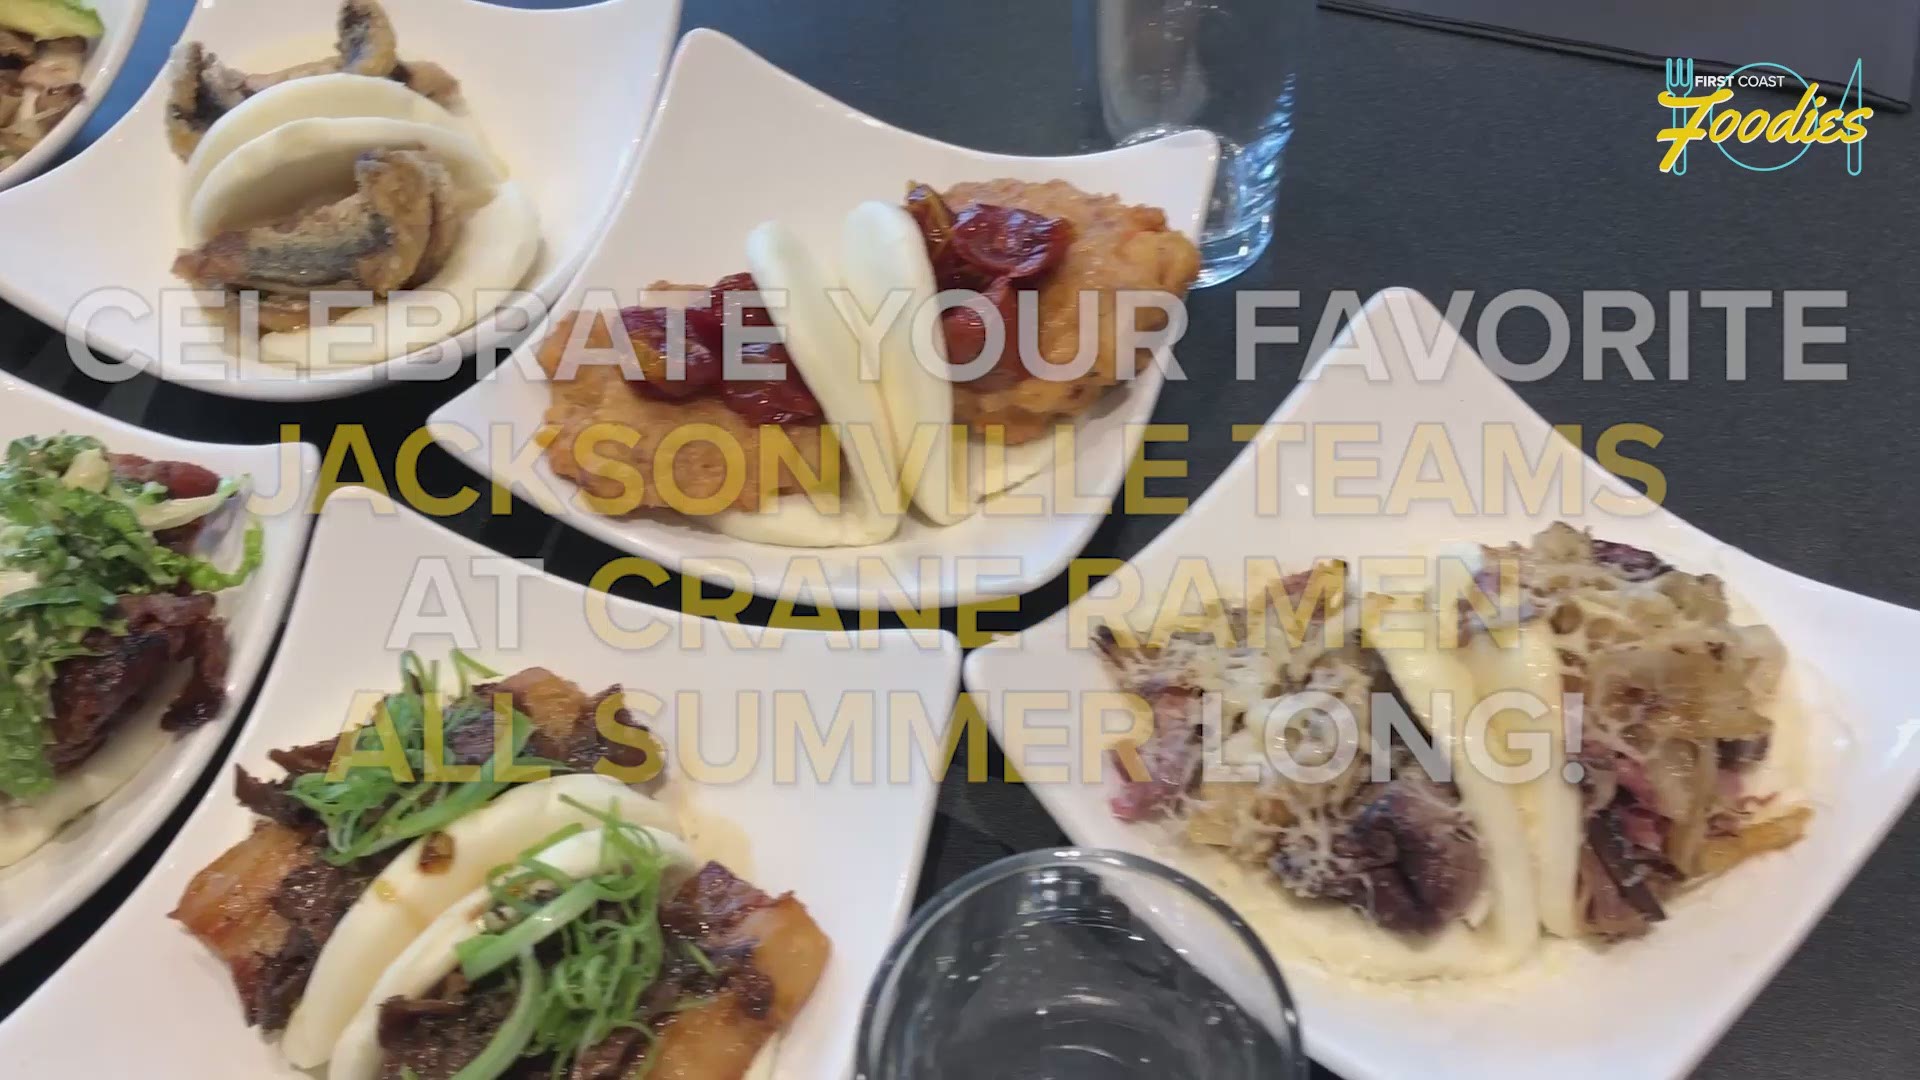 #ICYMI: Crane Ramen in Five Points is celebrating Jacksonville, Fla. sports teams all summer long by releasing a new bao bun flavor only available every Wednesday and Thursday.

Here's a look back at what's been on the limited-time menu, and a glance at what's coming. Who is excited for the Jacksonville Jaguars bun? YUM!